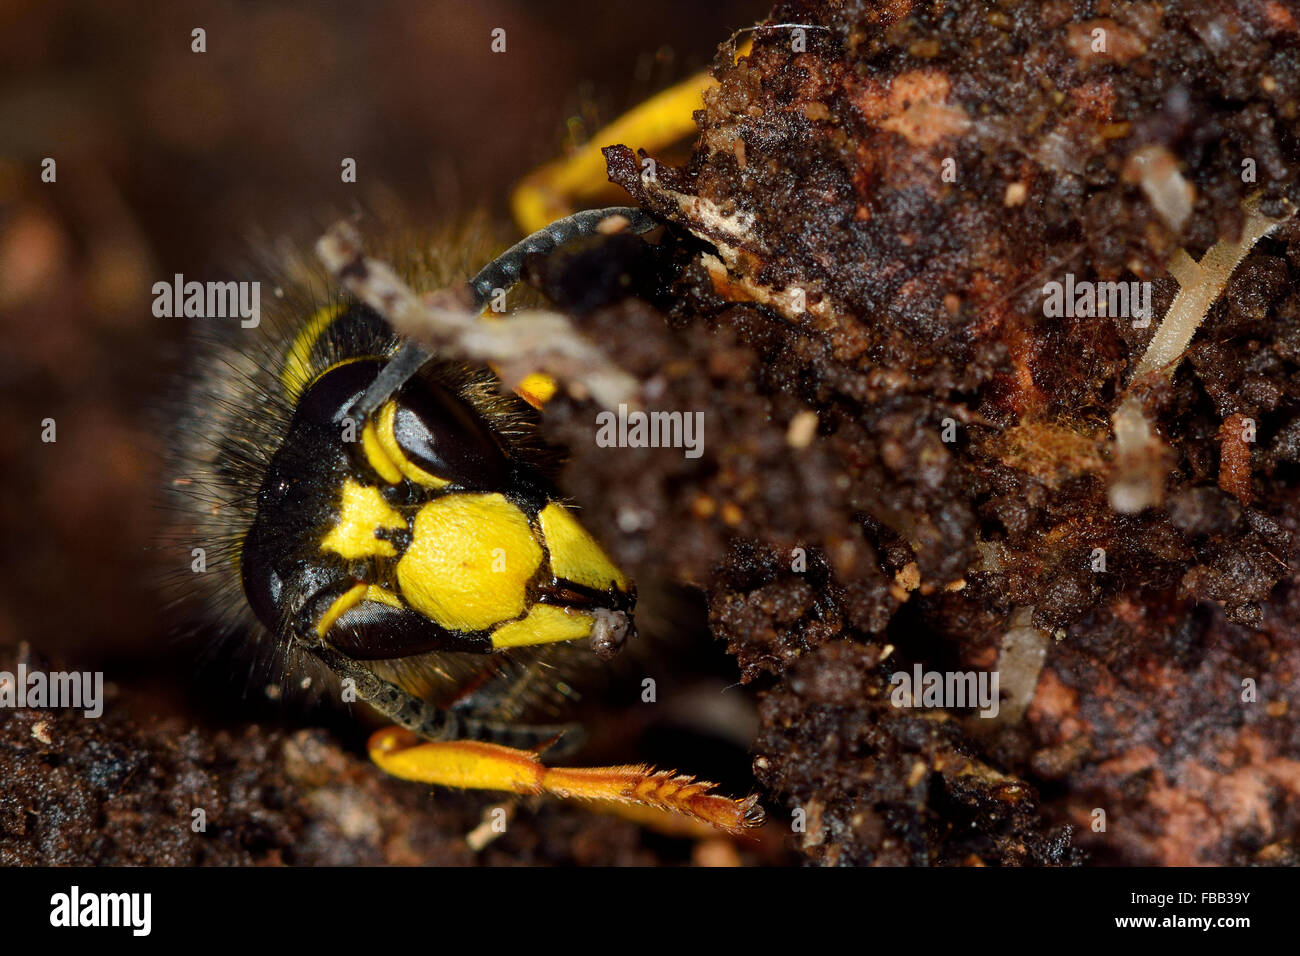 Tree wasp (Dolichovespula sylvestris) queen. A wasp in the family Vespidae seen head-on, showing identifying facial features Stock Photo